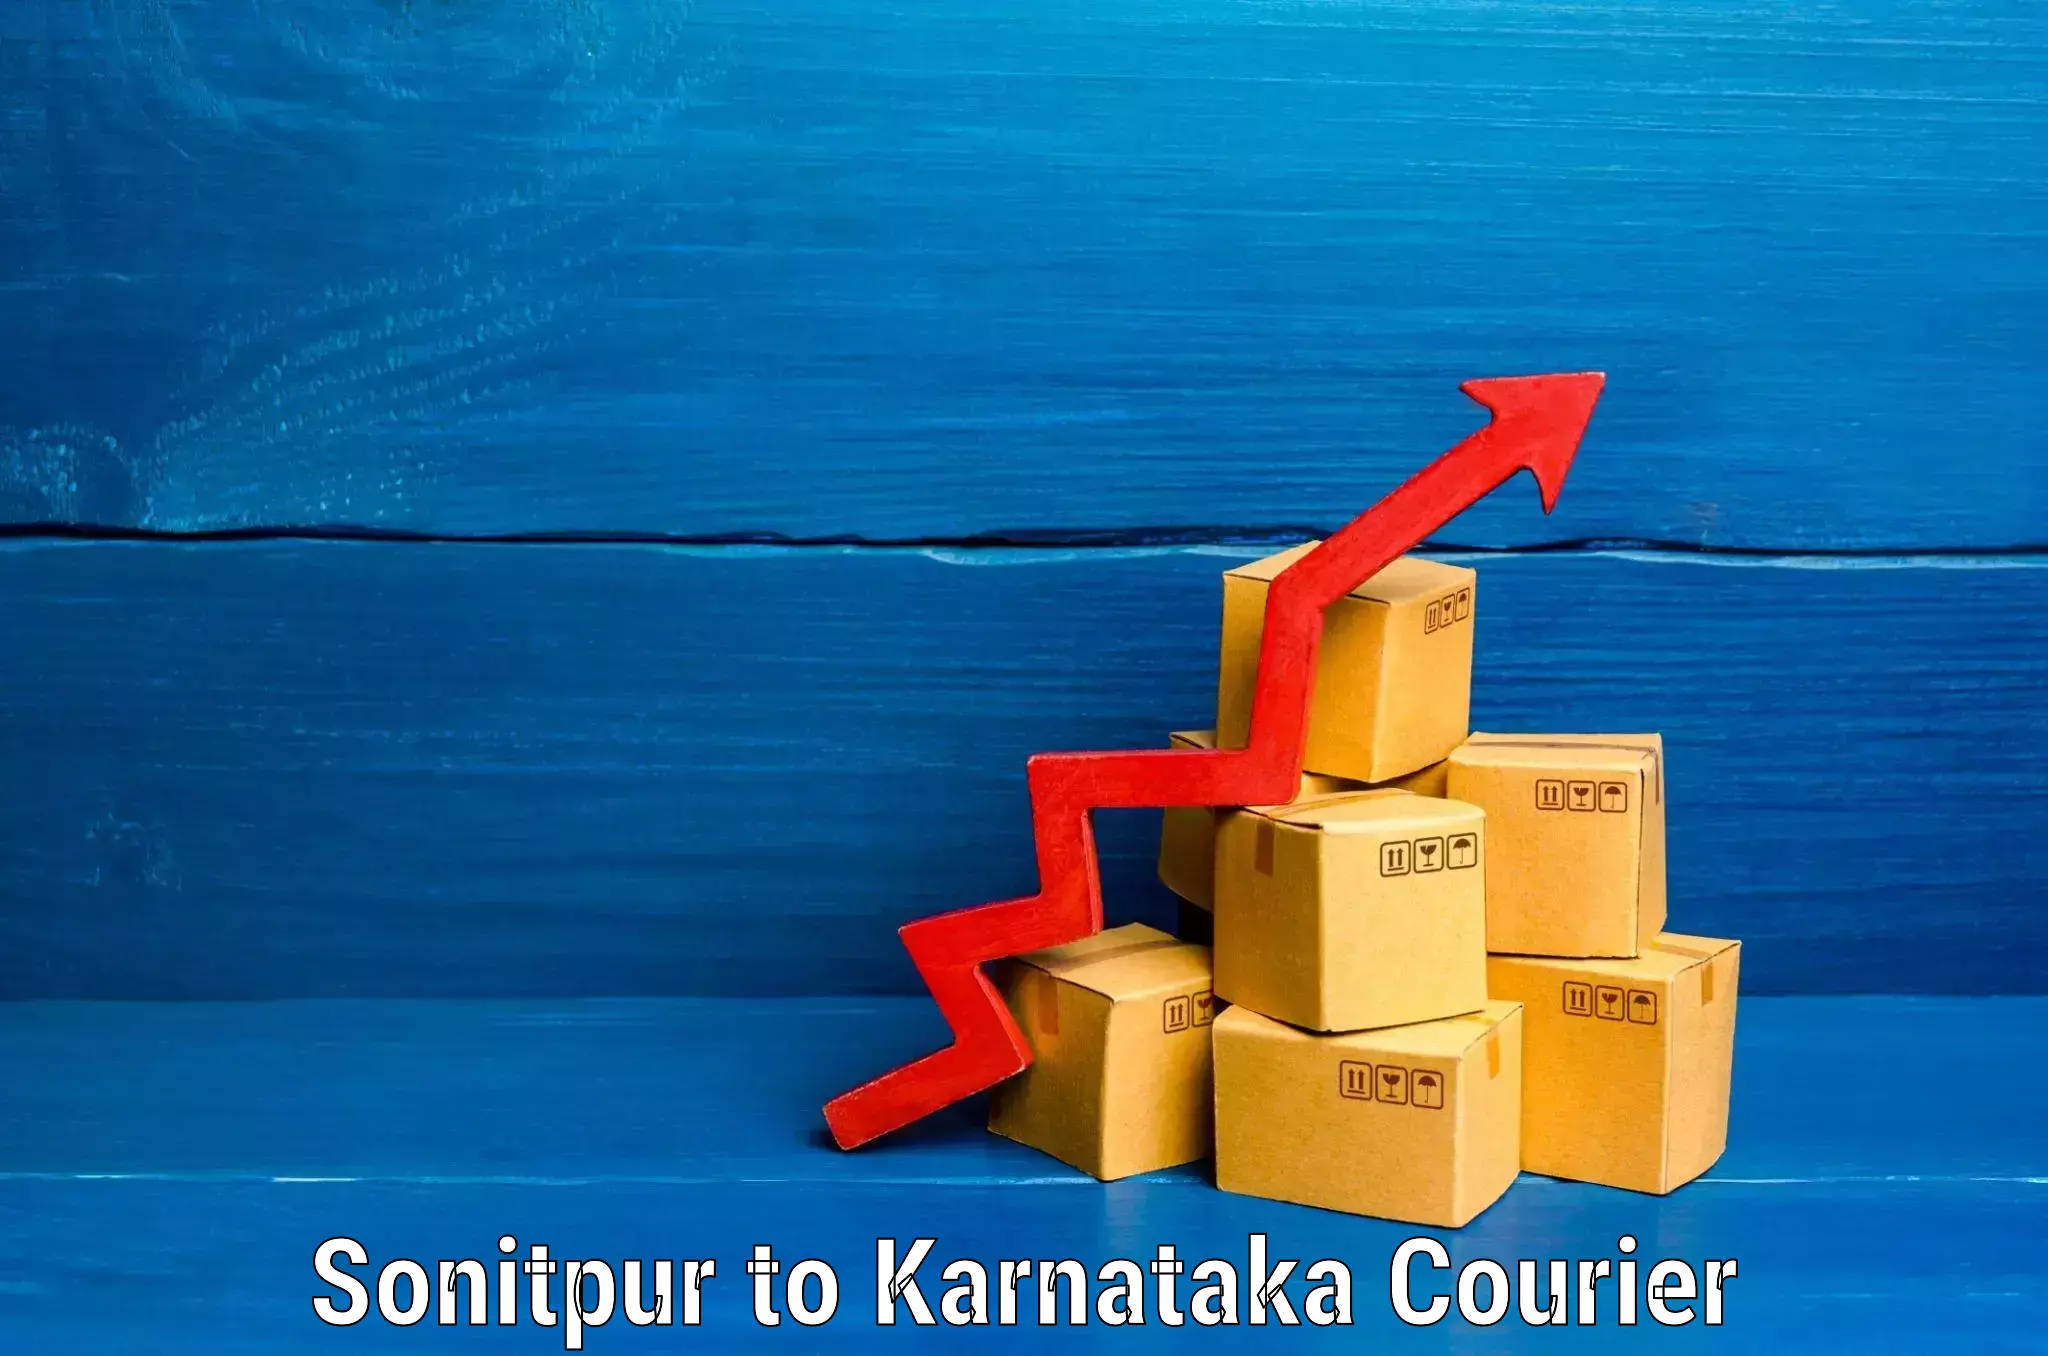 Baggage shipping service Sonitpur to Bhatkal